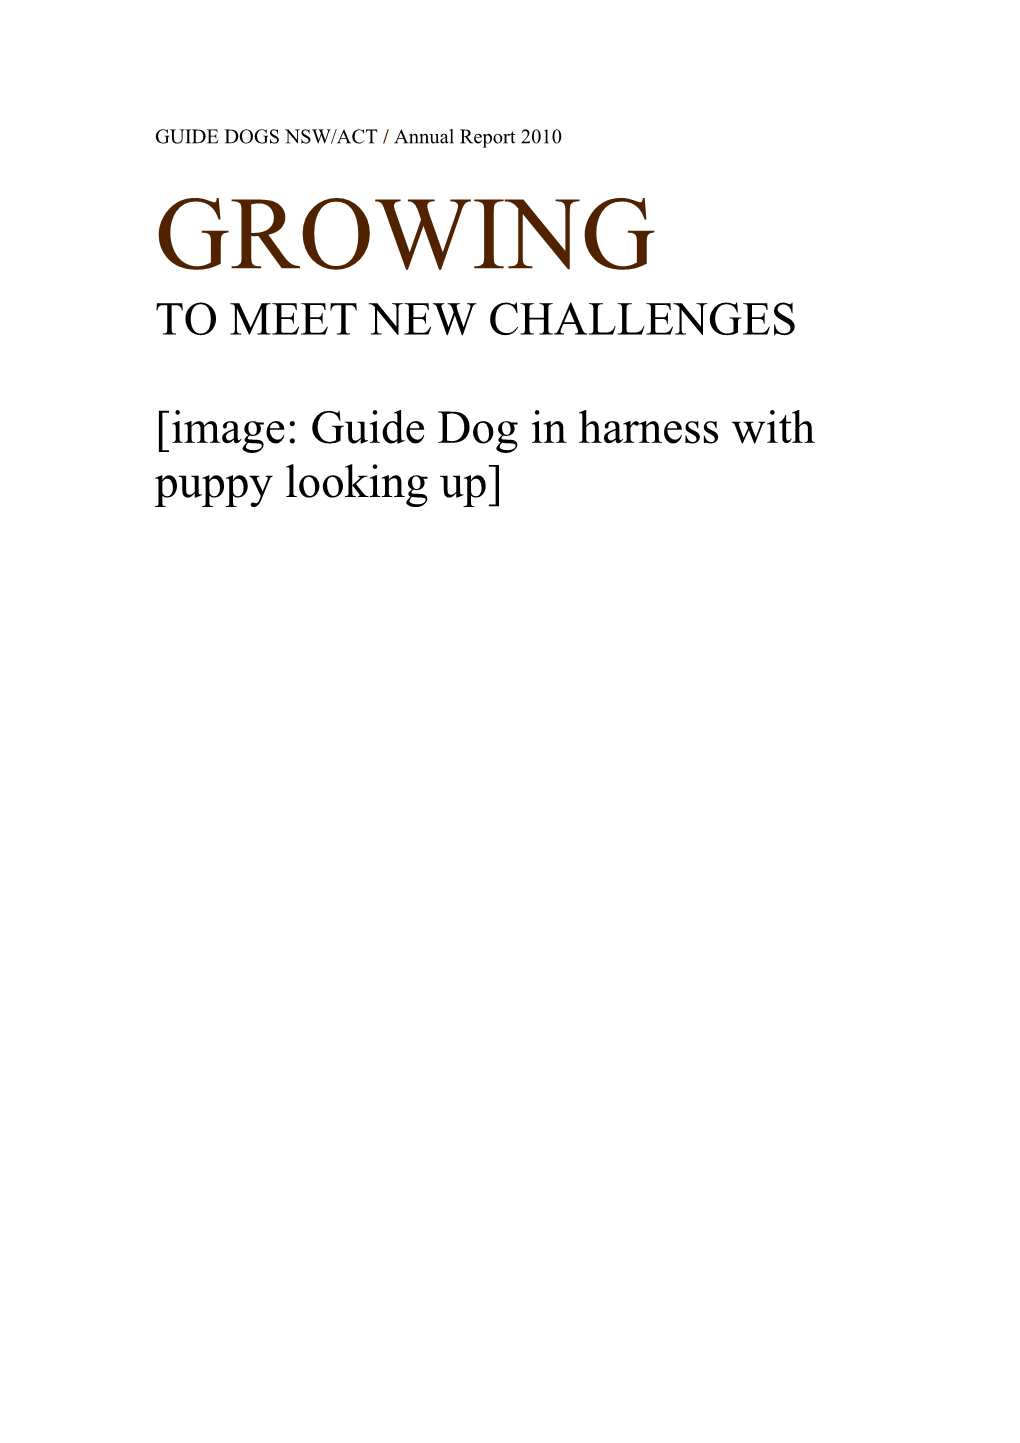 GUIDE DOGS NSW/ACT / Annual Report 2010